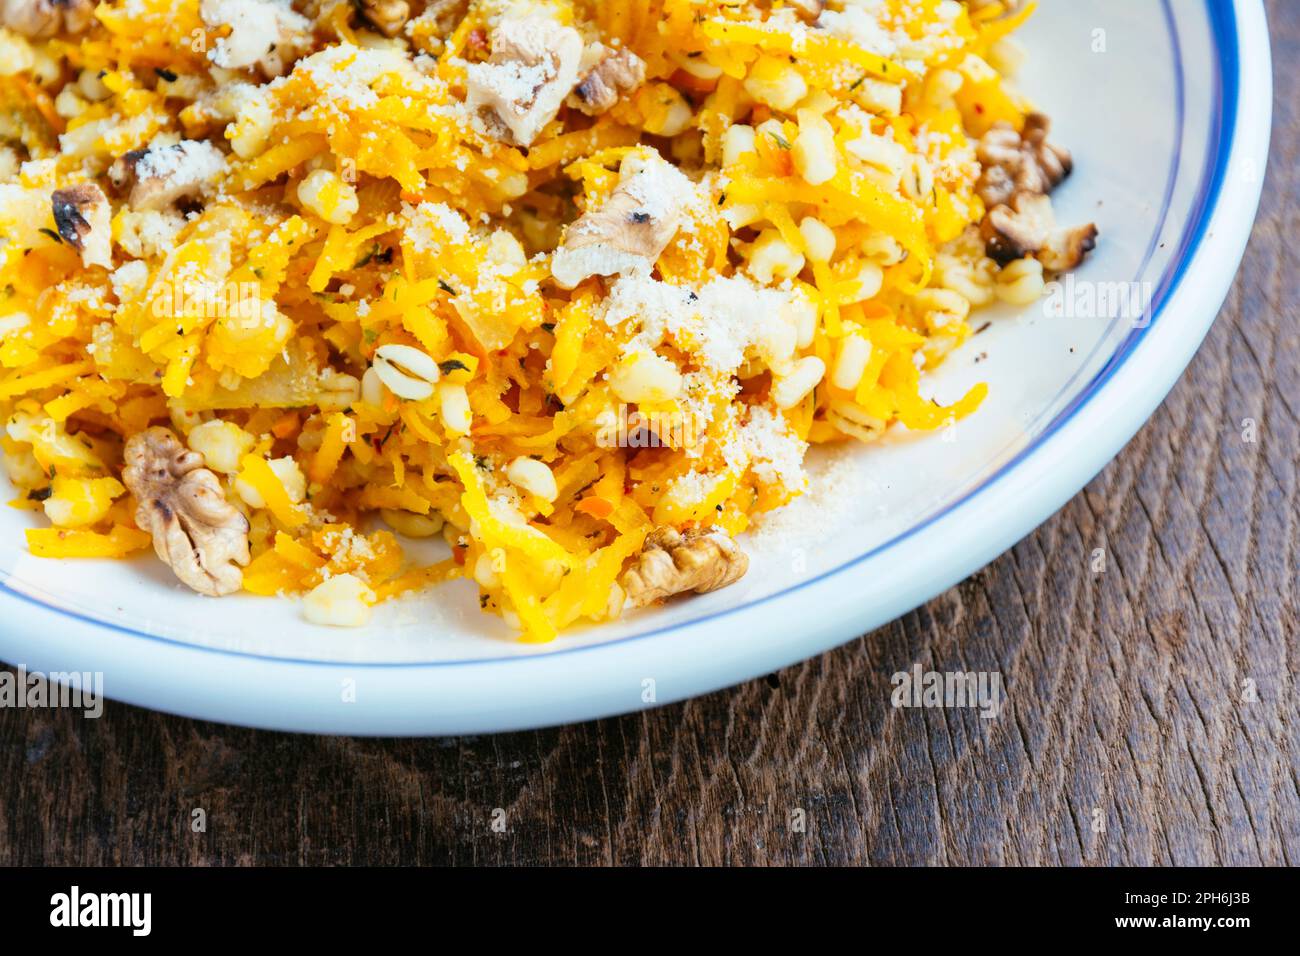 Barley orzotto with winter squash and toasted walnuts. Stock Photo